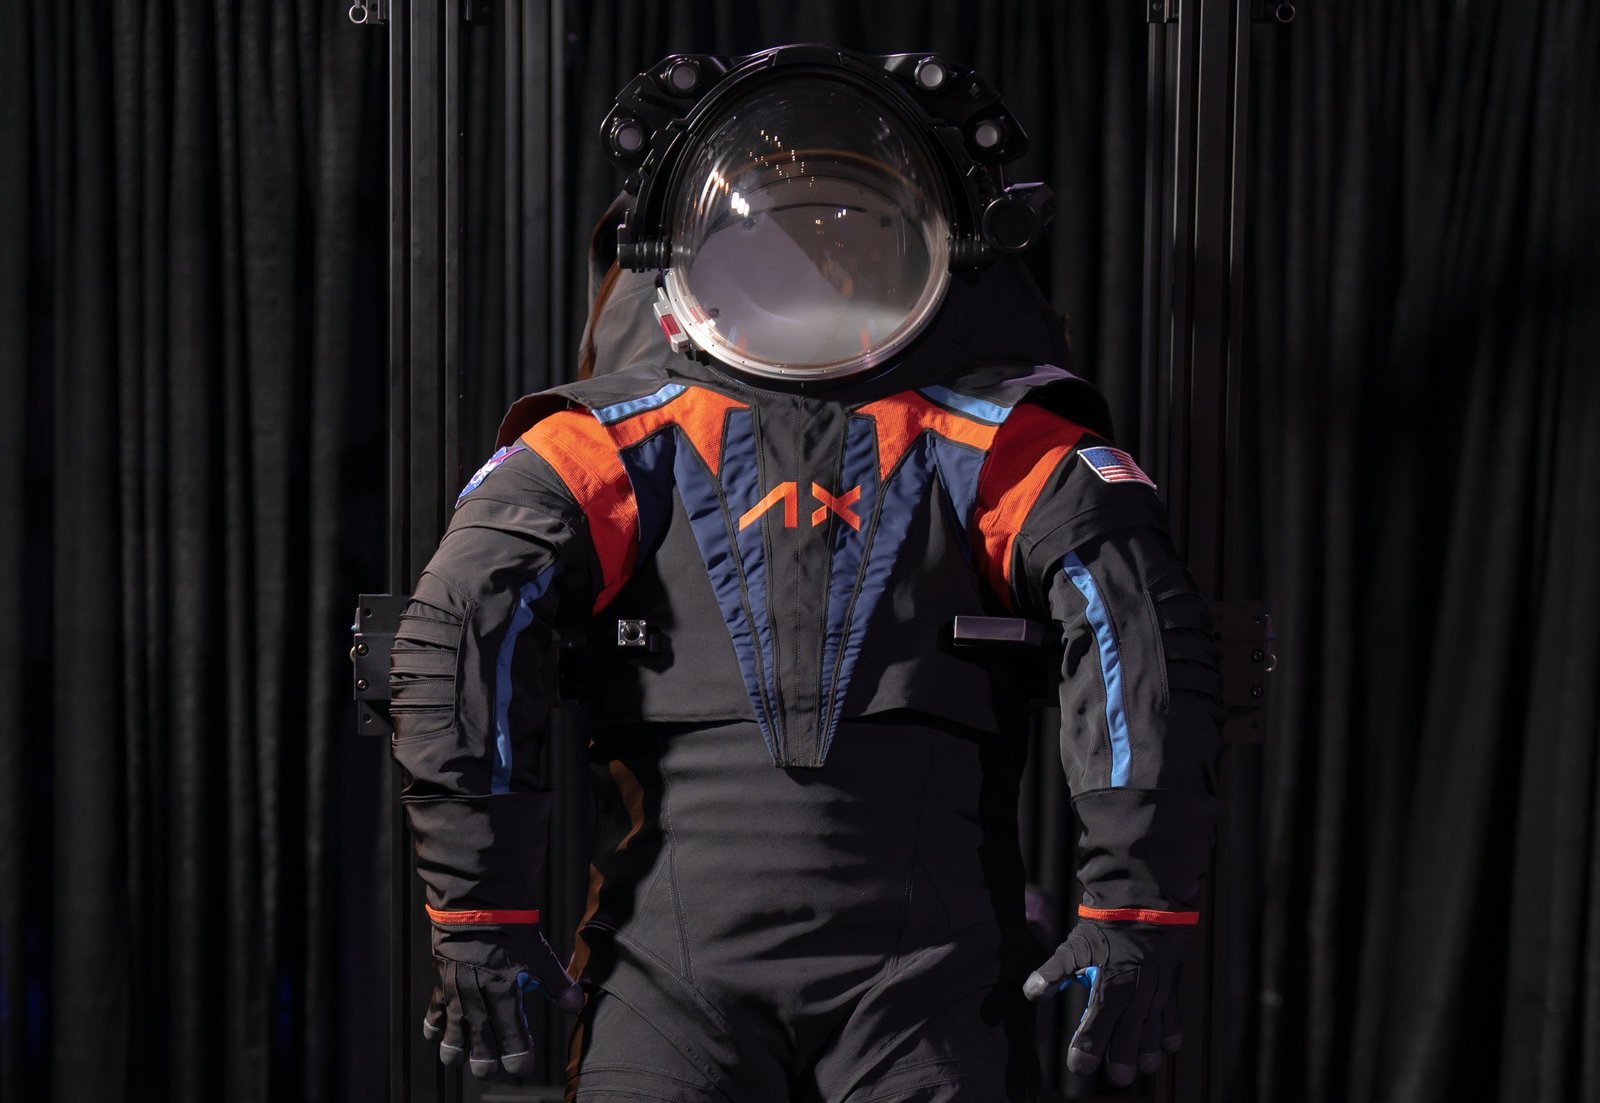 A space suit, latest innovation for the lunar surface